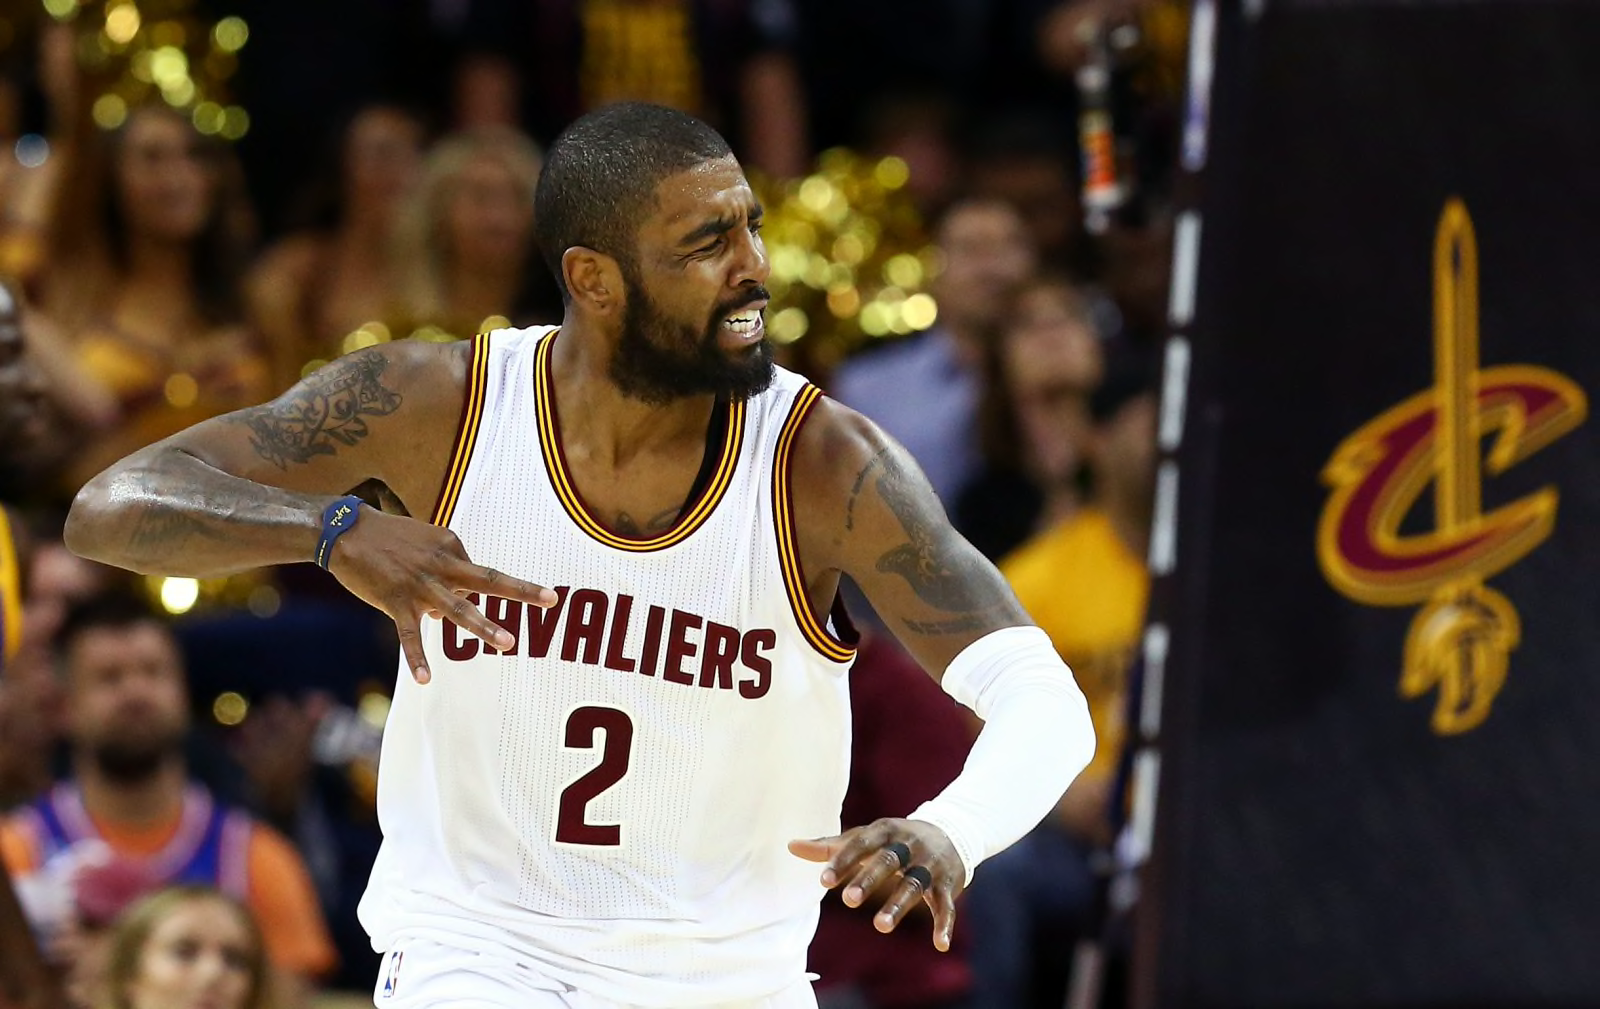 NBA Draft 2011: Kyrie Irving taken as No. 1 pick by Cleveland Cavaliers 